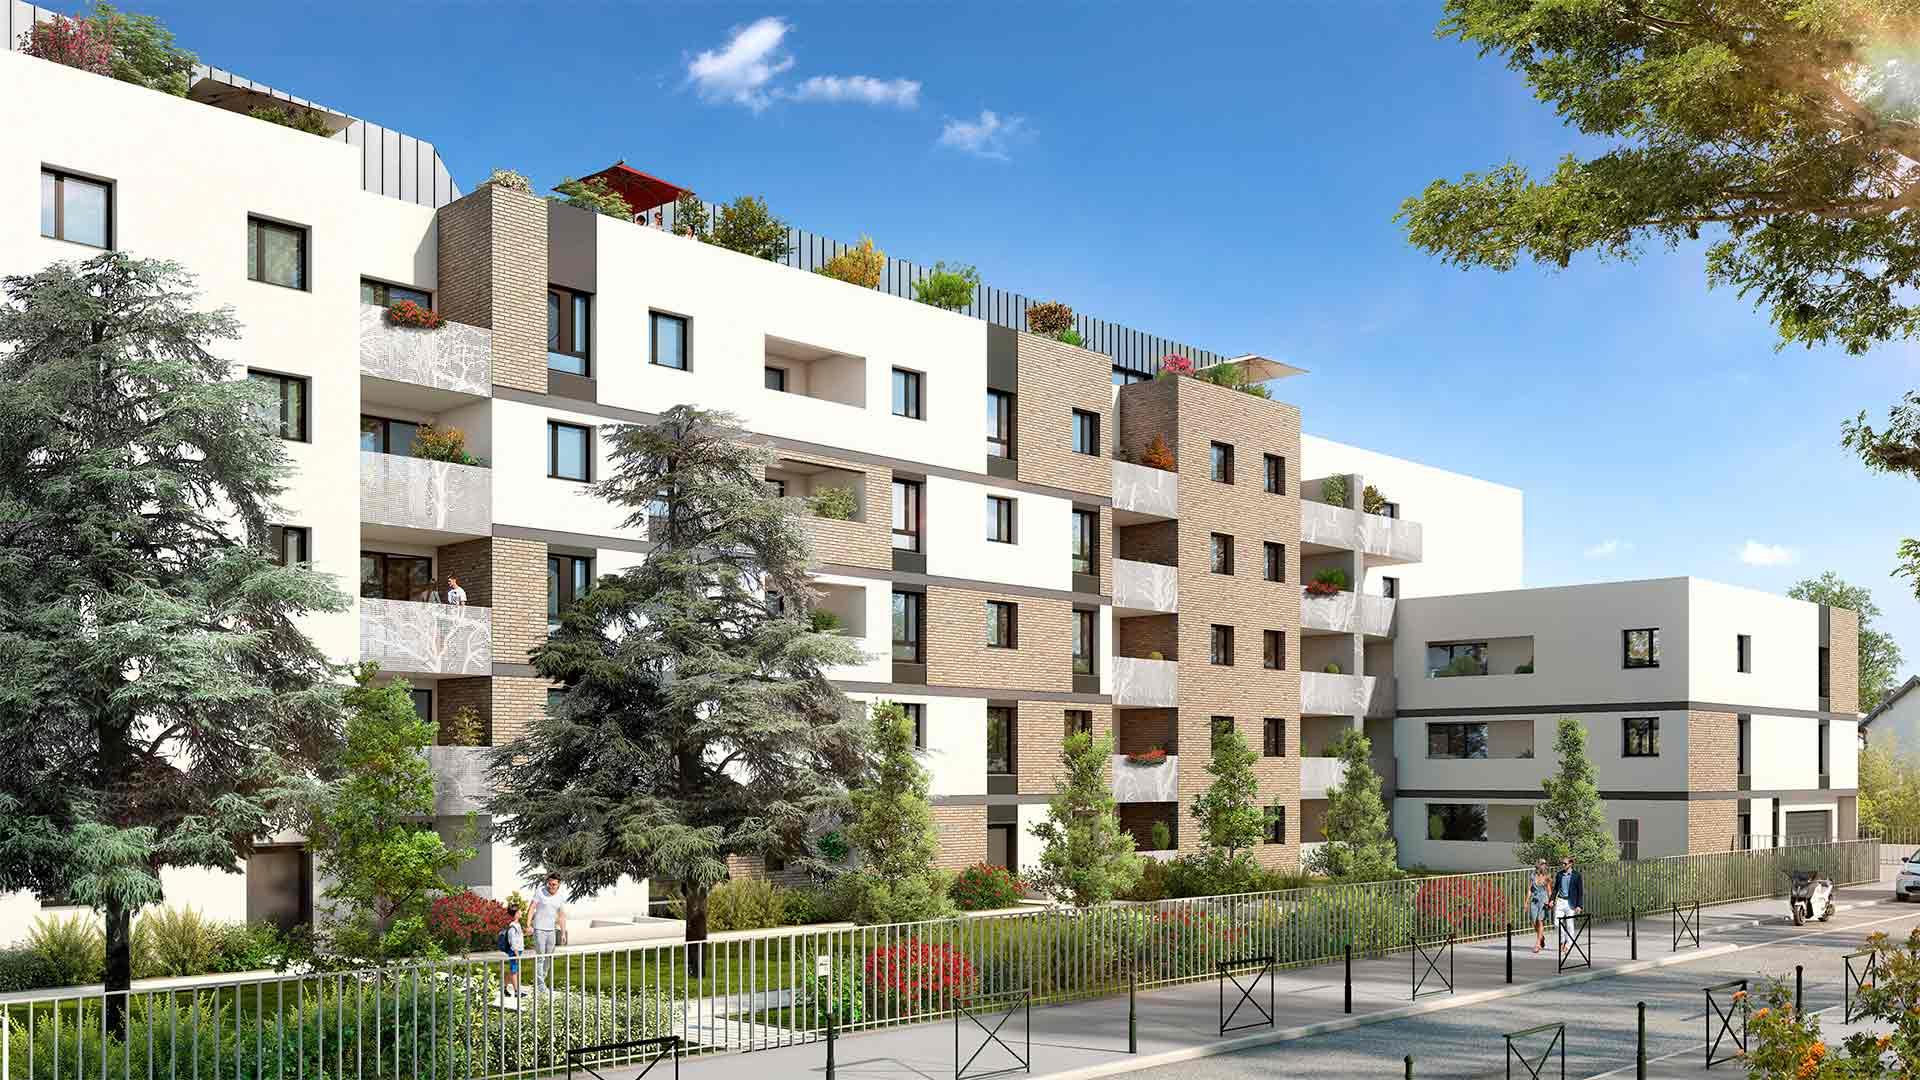 Programme immobilier neuf 31000 Toulouse TLS-865